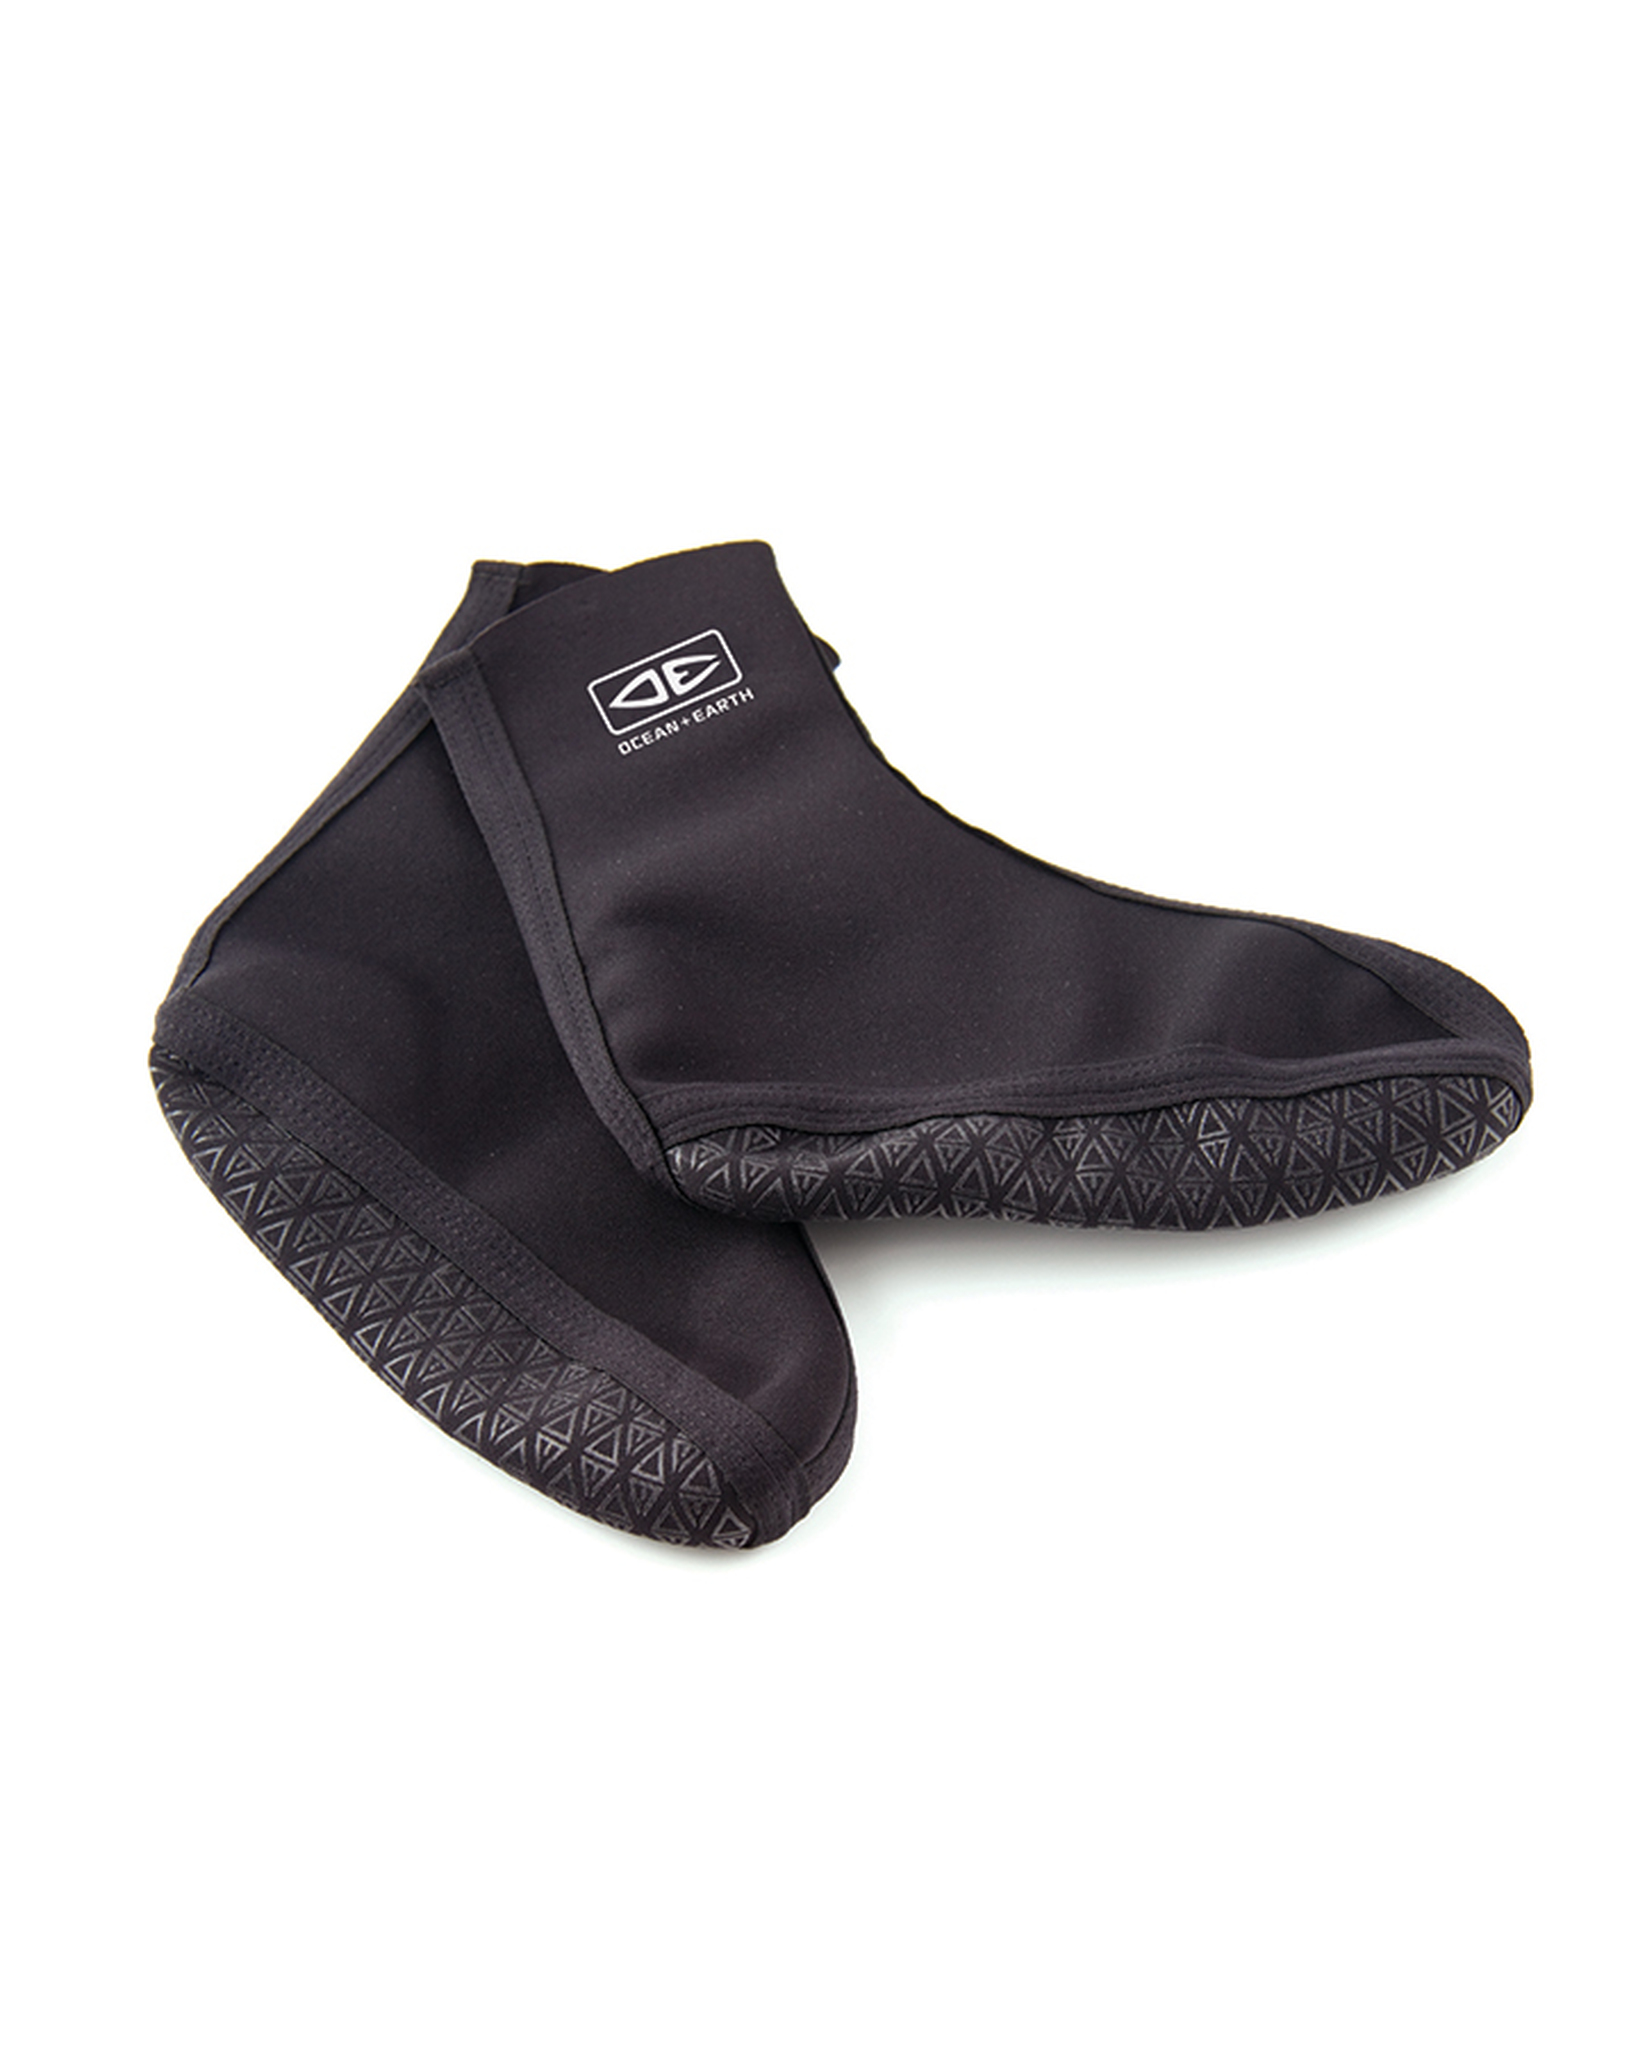 Body Glove Wetsuit Socks - Cables Wake Park